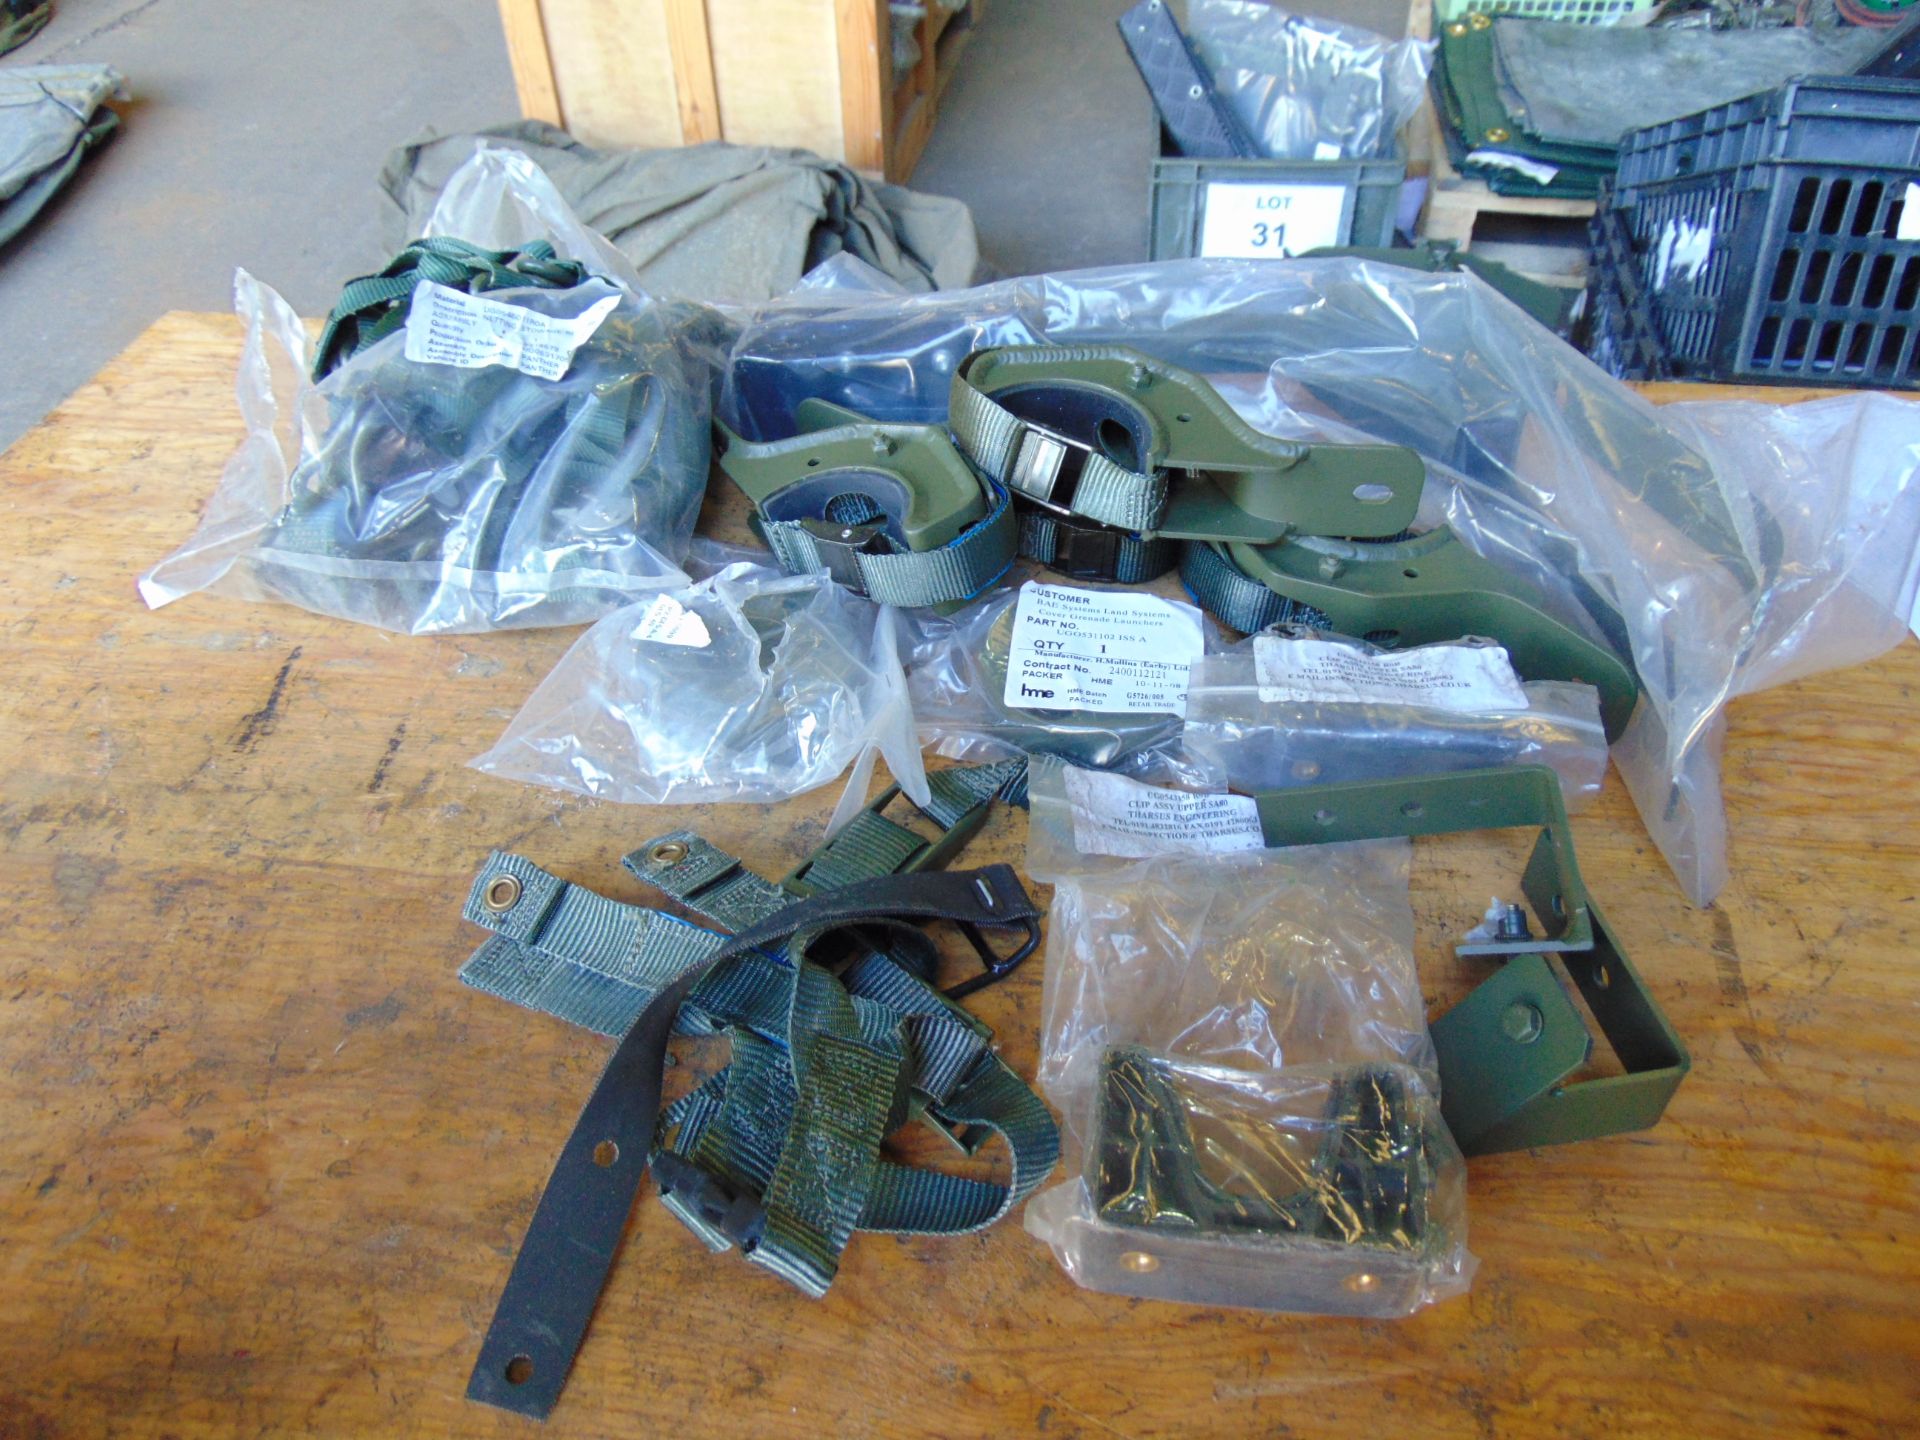 New Unissued WIMIK SA 80 Clips Launcher Covers, Stowage Straps, Barrel Clamps etc - Image 8 of 9